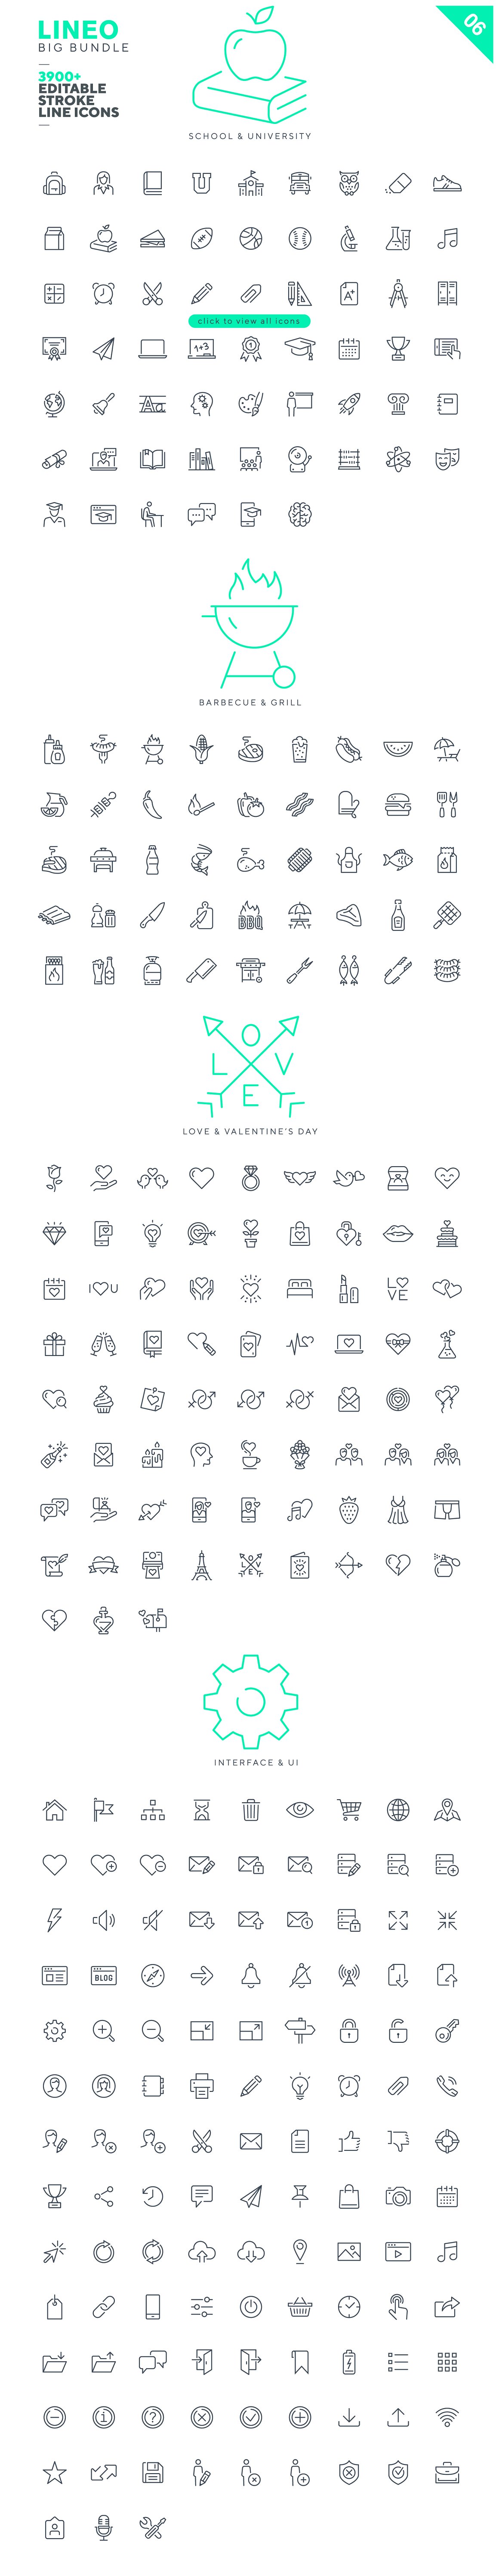 School & University, Barbecue & Grill, Love & Valentine’s day and Interface & UI icons on a white background.